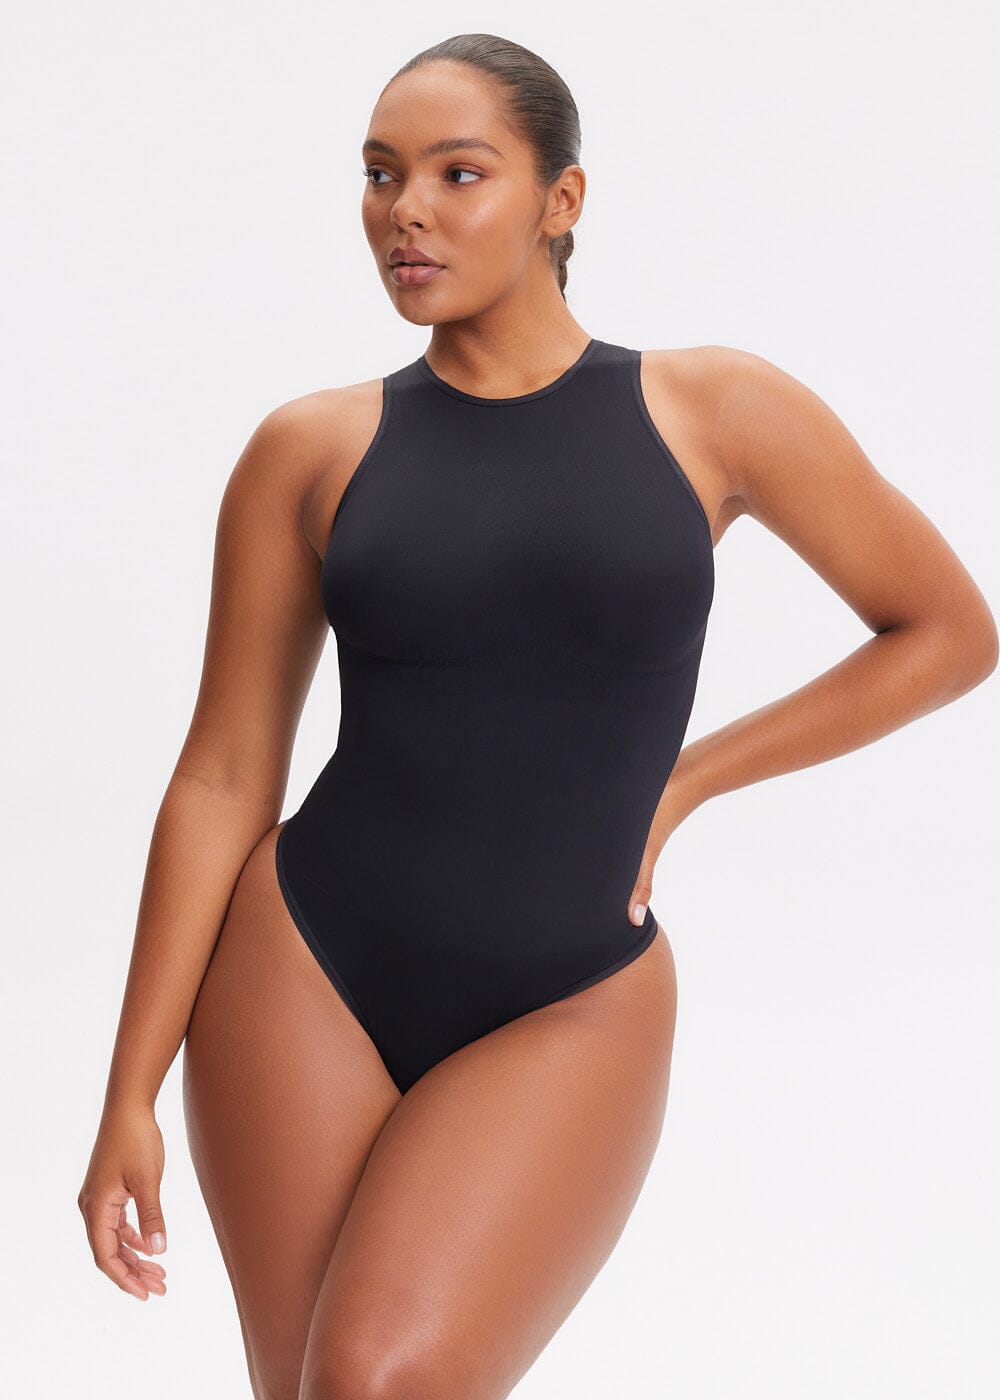 Women's Sexy Shapewear Bodysuit, Plus Size Seamless Double Layered Tummy  Control Thong Halter Body Shaper, Free Shipping For New Users